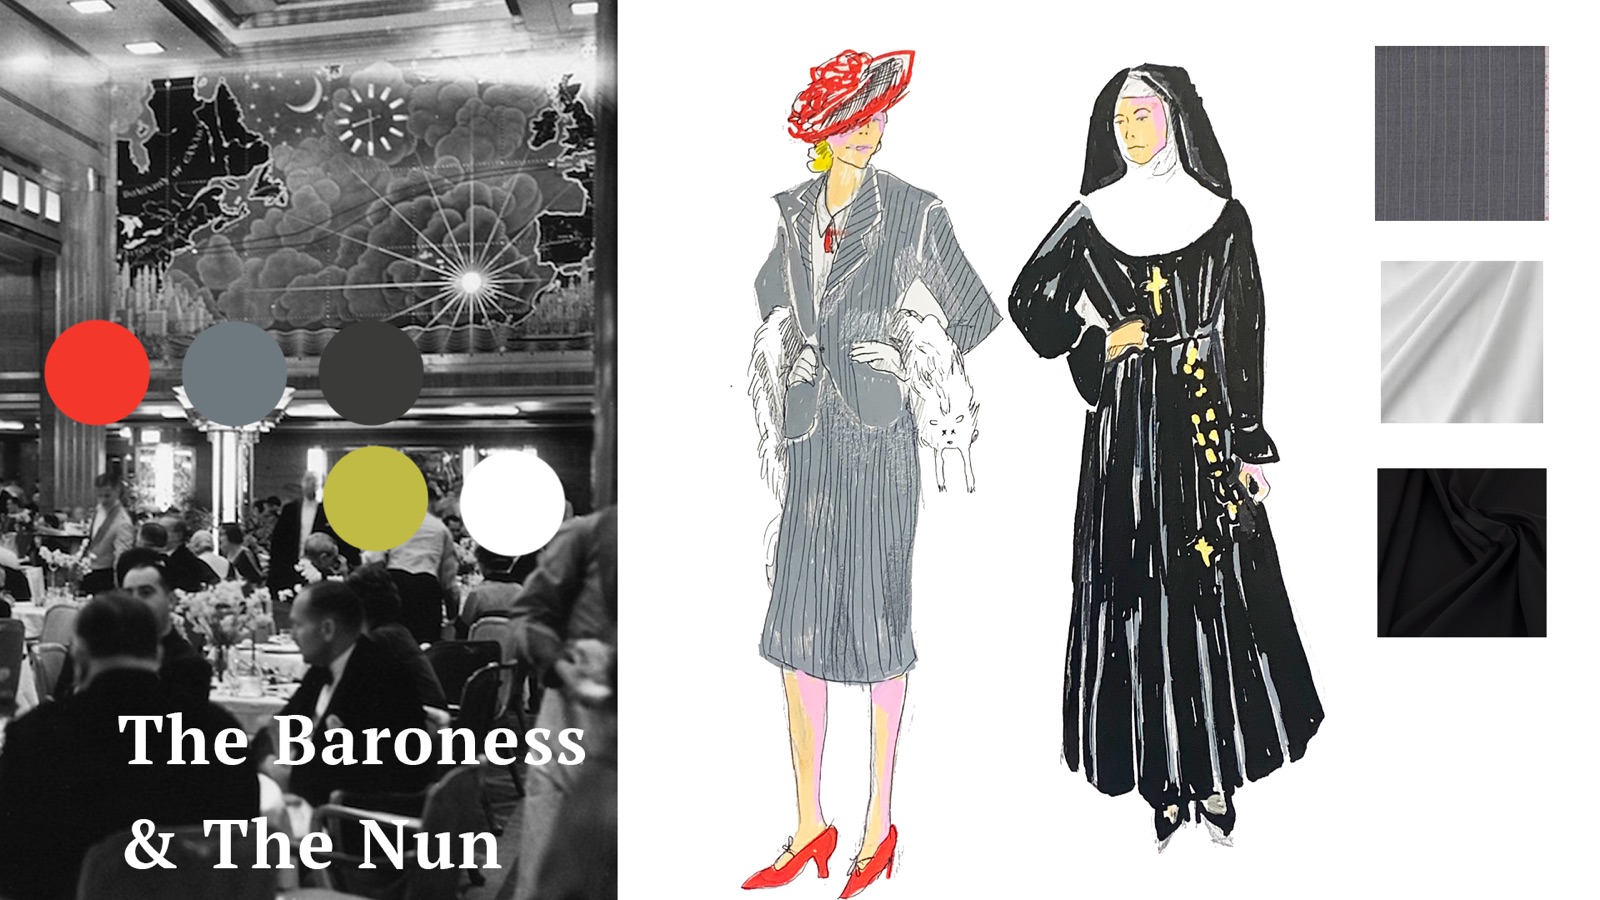 Olivia Comai - The Baroness & The Nun, The Lady Vanishes